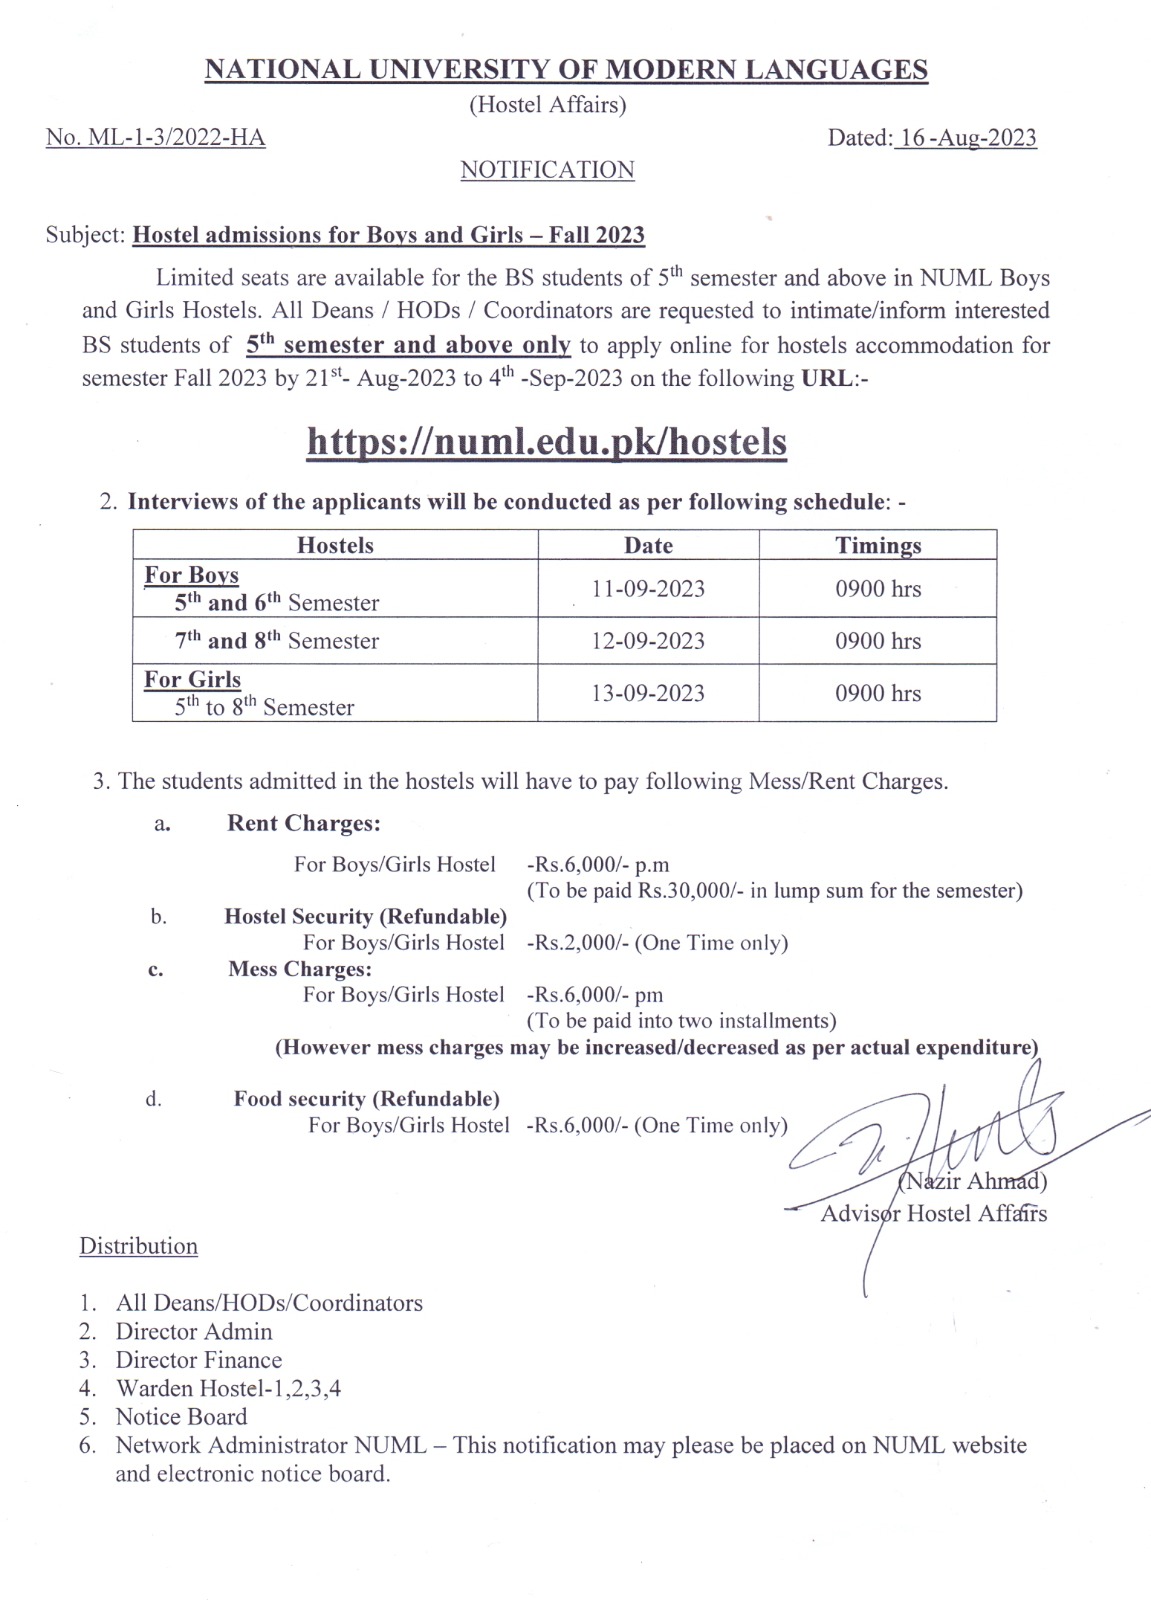 Hostel Admissions for Boys and Girls - Fall 2023